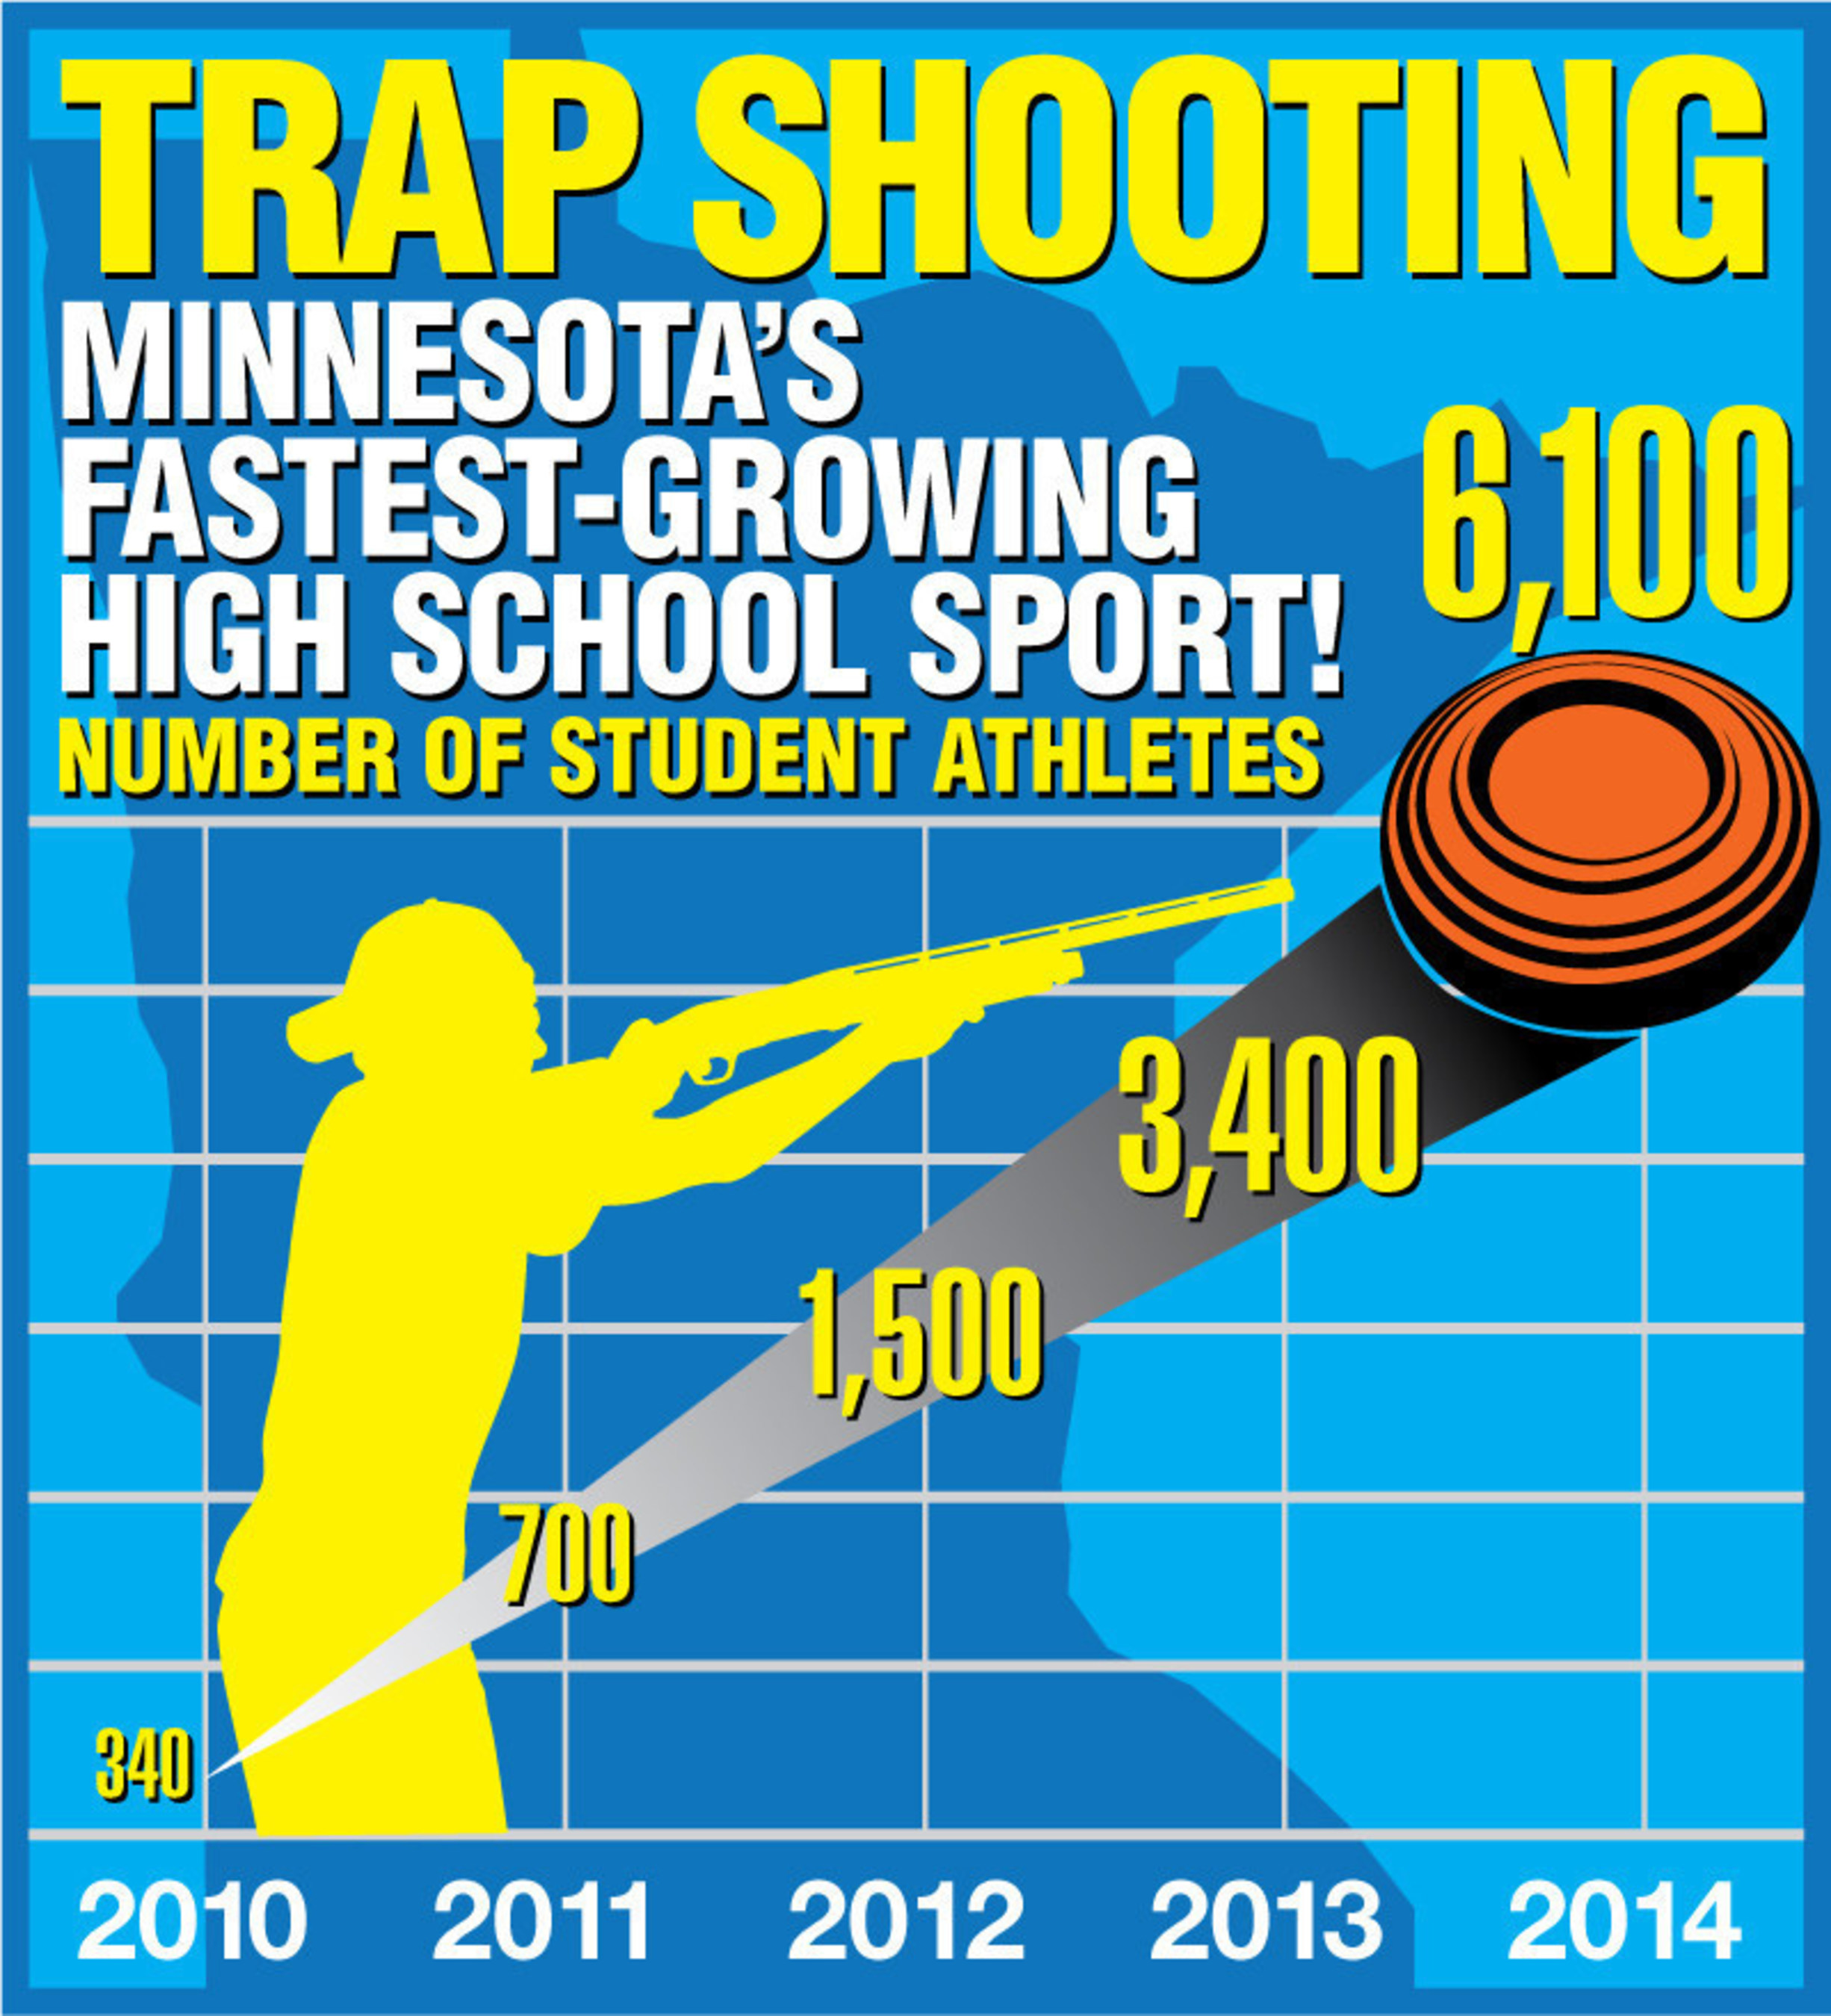 Minnesota State High School Clay Target League is Minnesota's fastest-growing high school sport in the 2013-2014 school year.